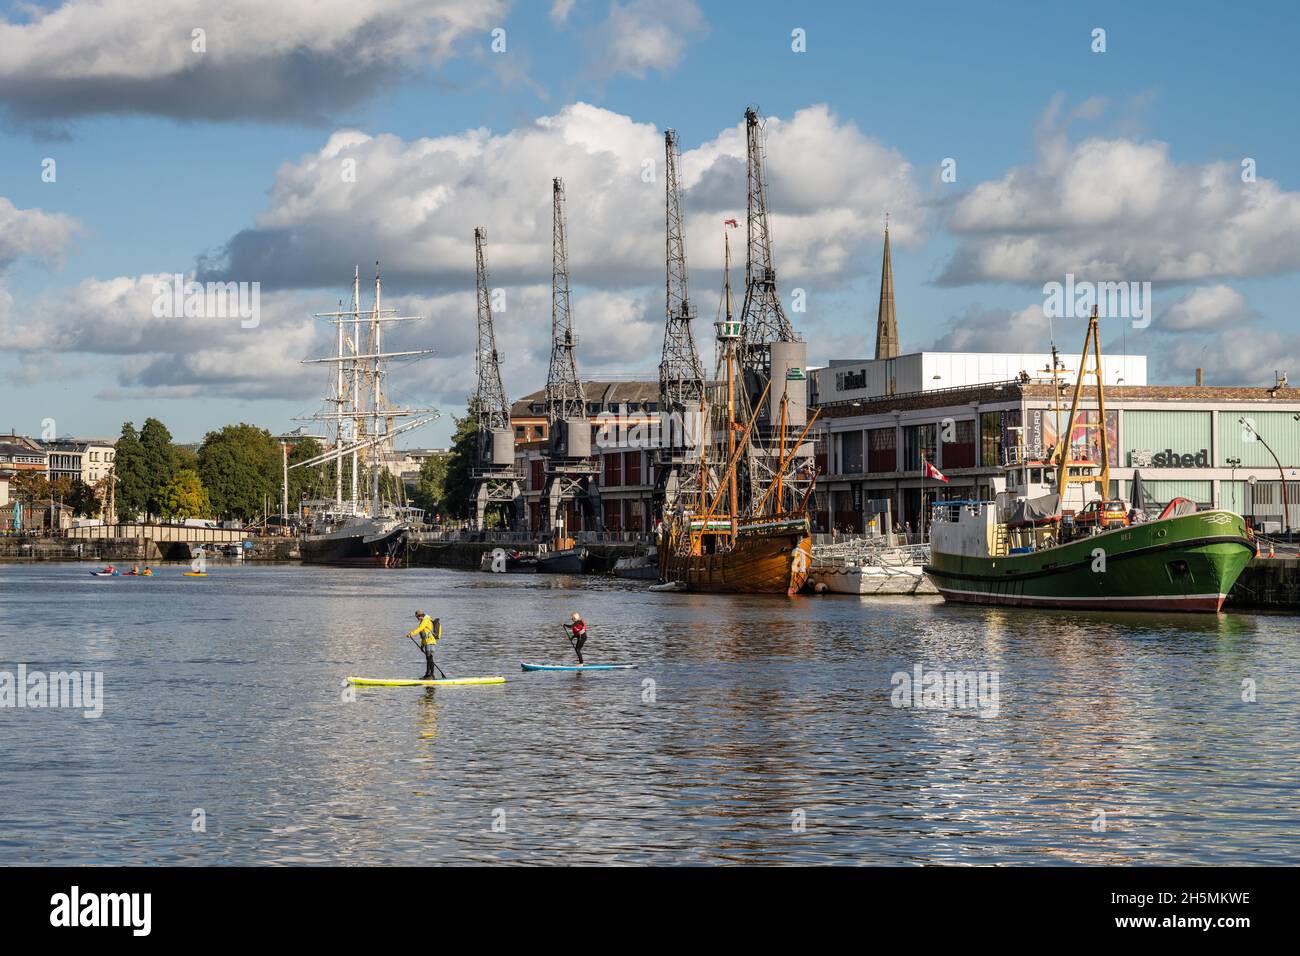 Paddleboarders paddle across Bristol's Floating Harbour, with historic ships docked outside the M Shed museum behind. Stock Photo